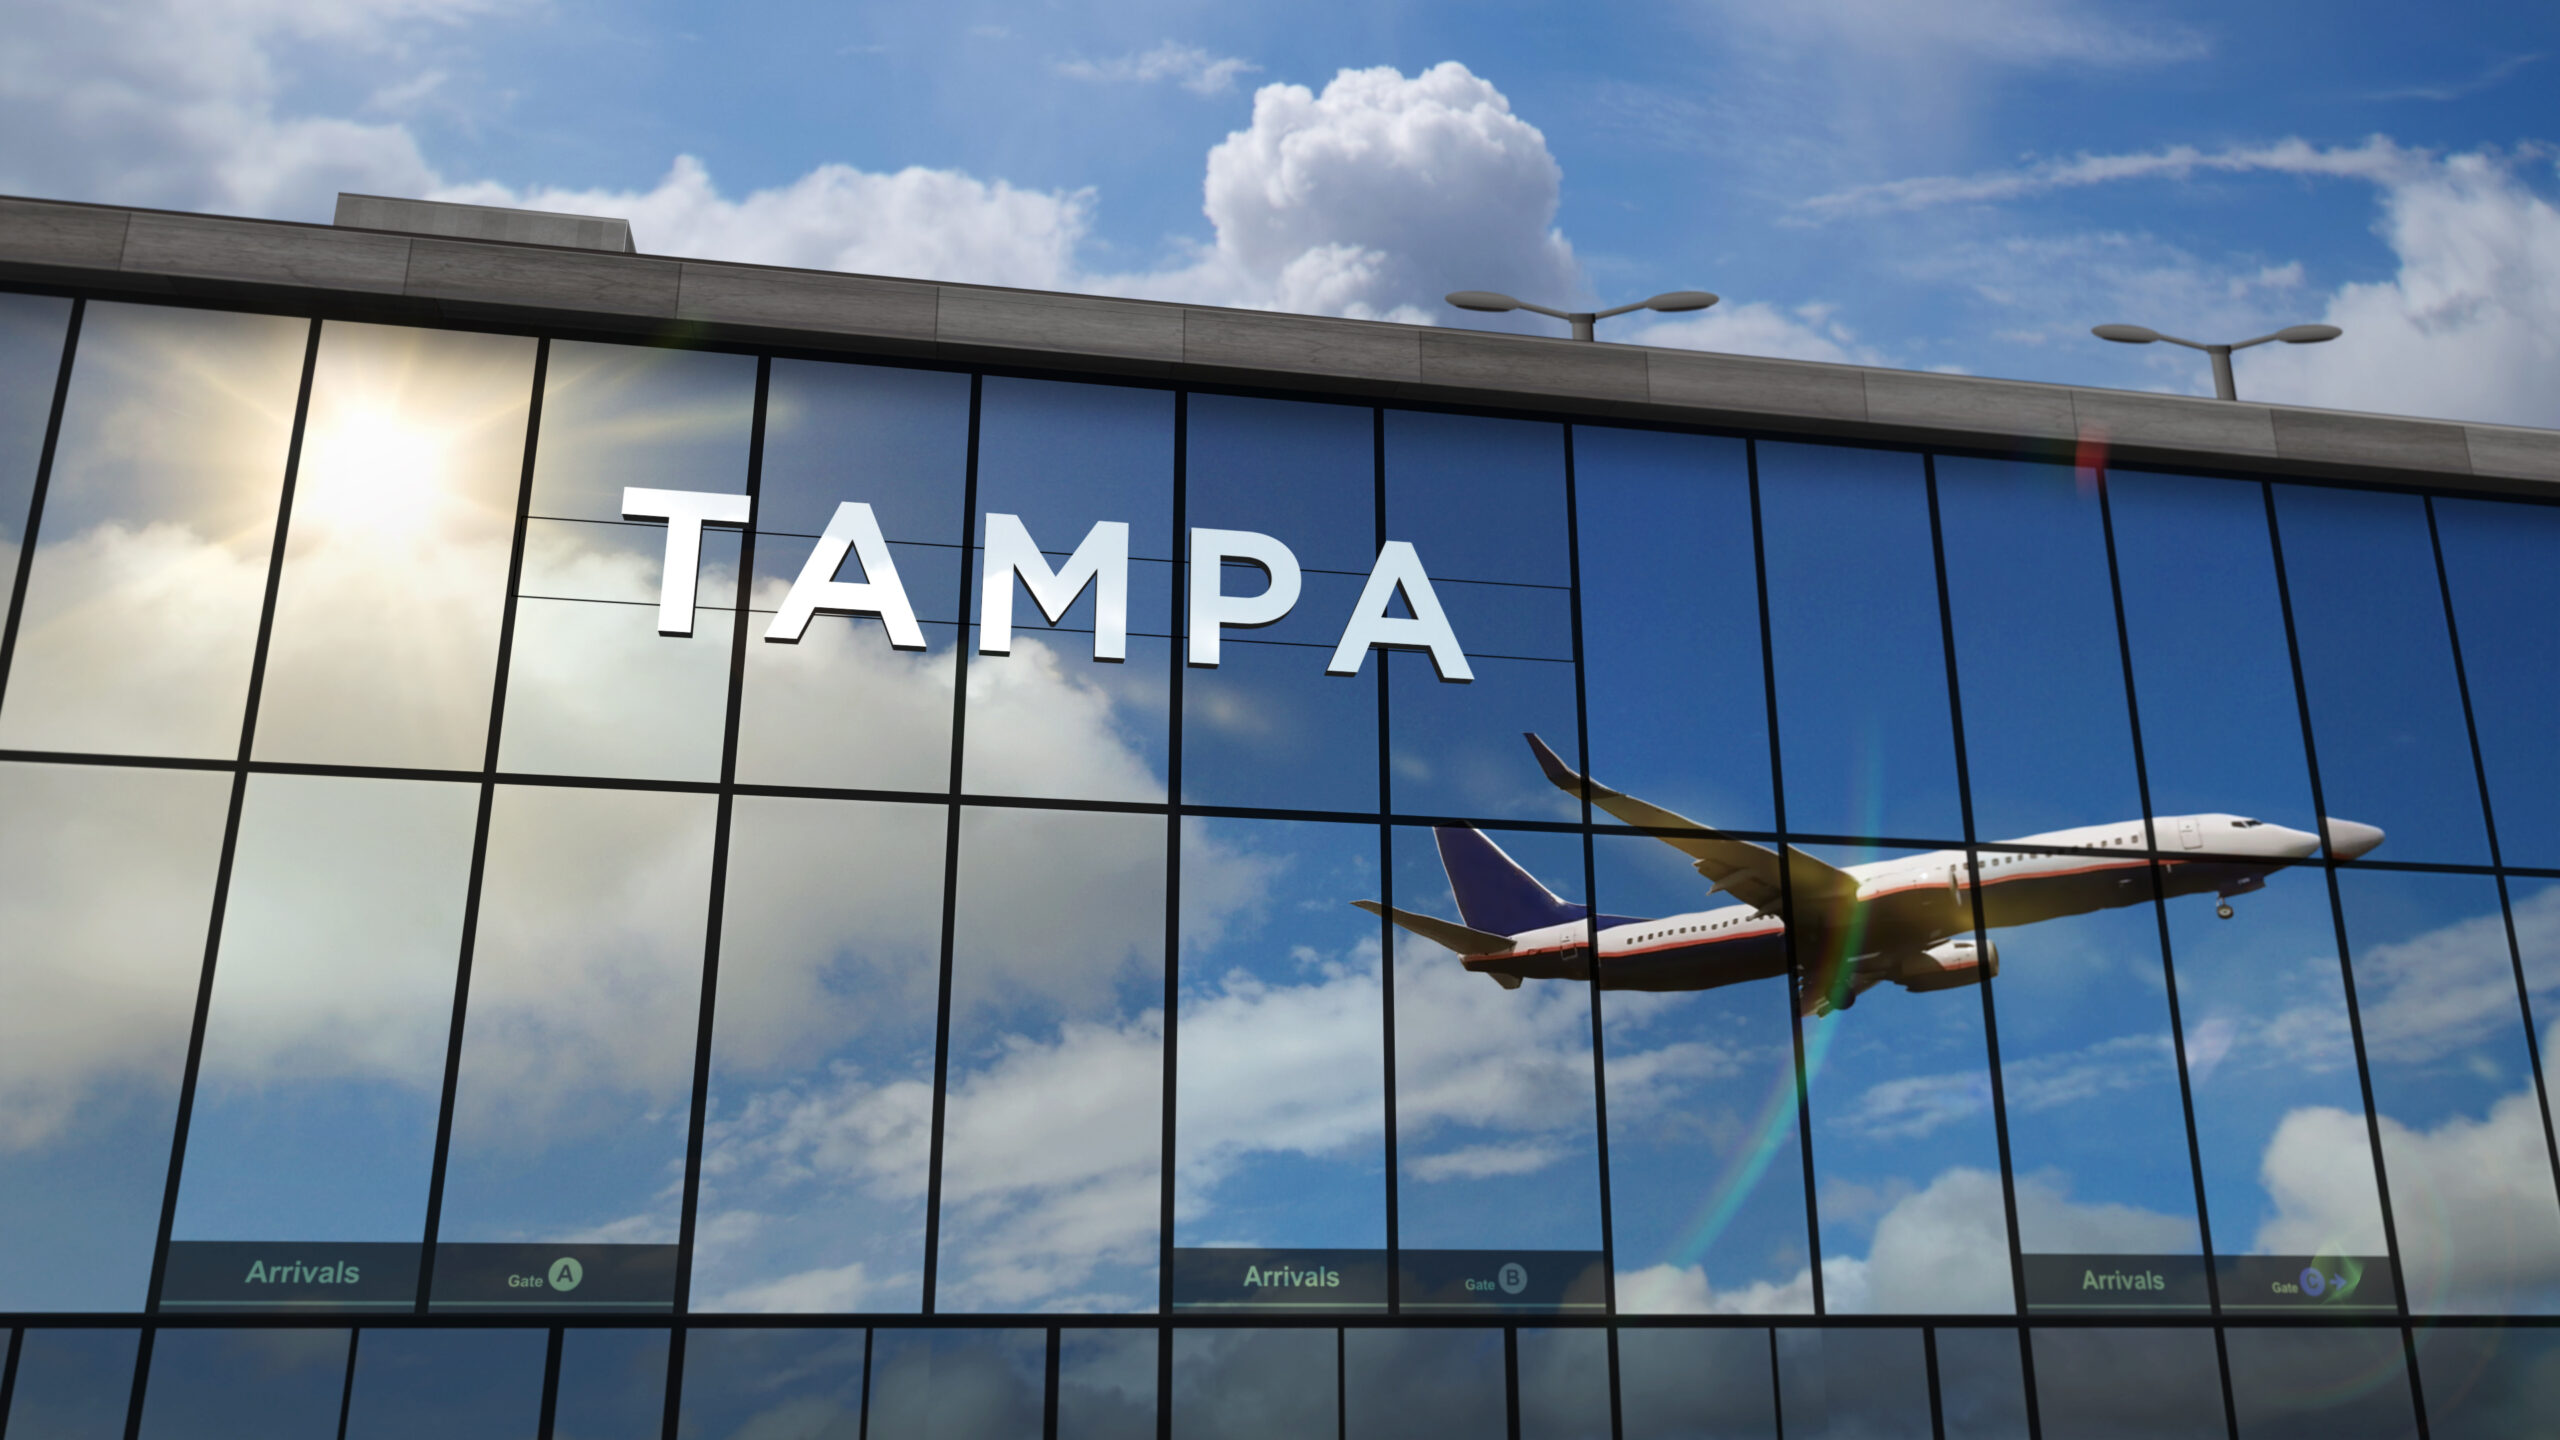 The Tampa Airport, with an image of a plane reflected on the side.